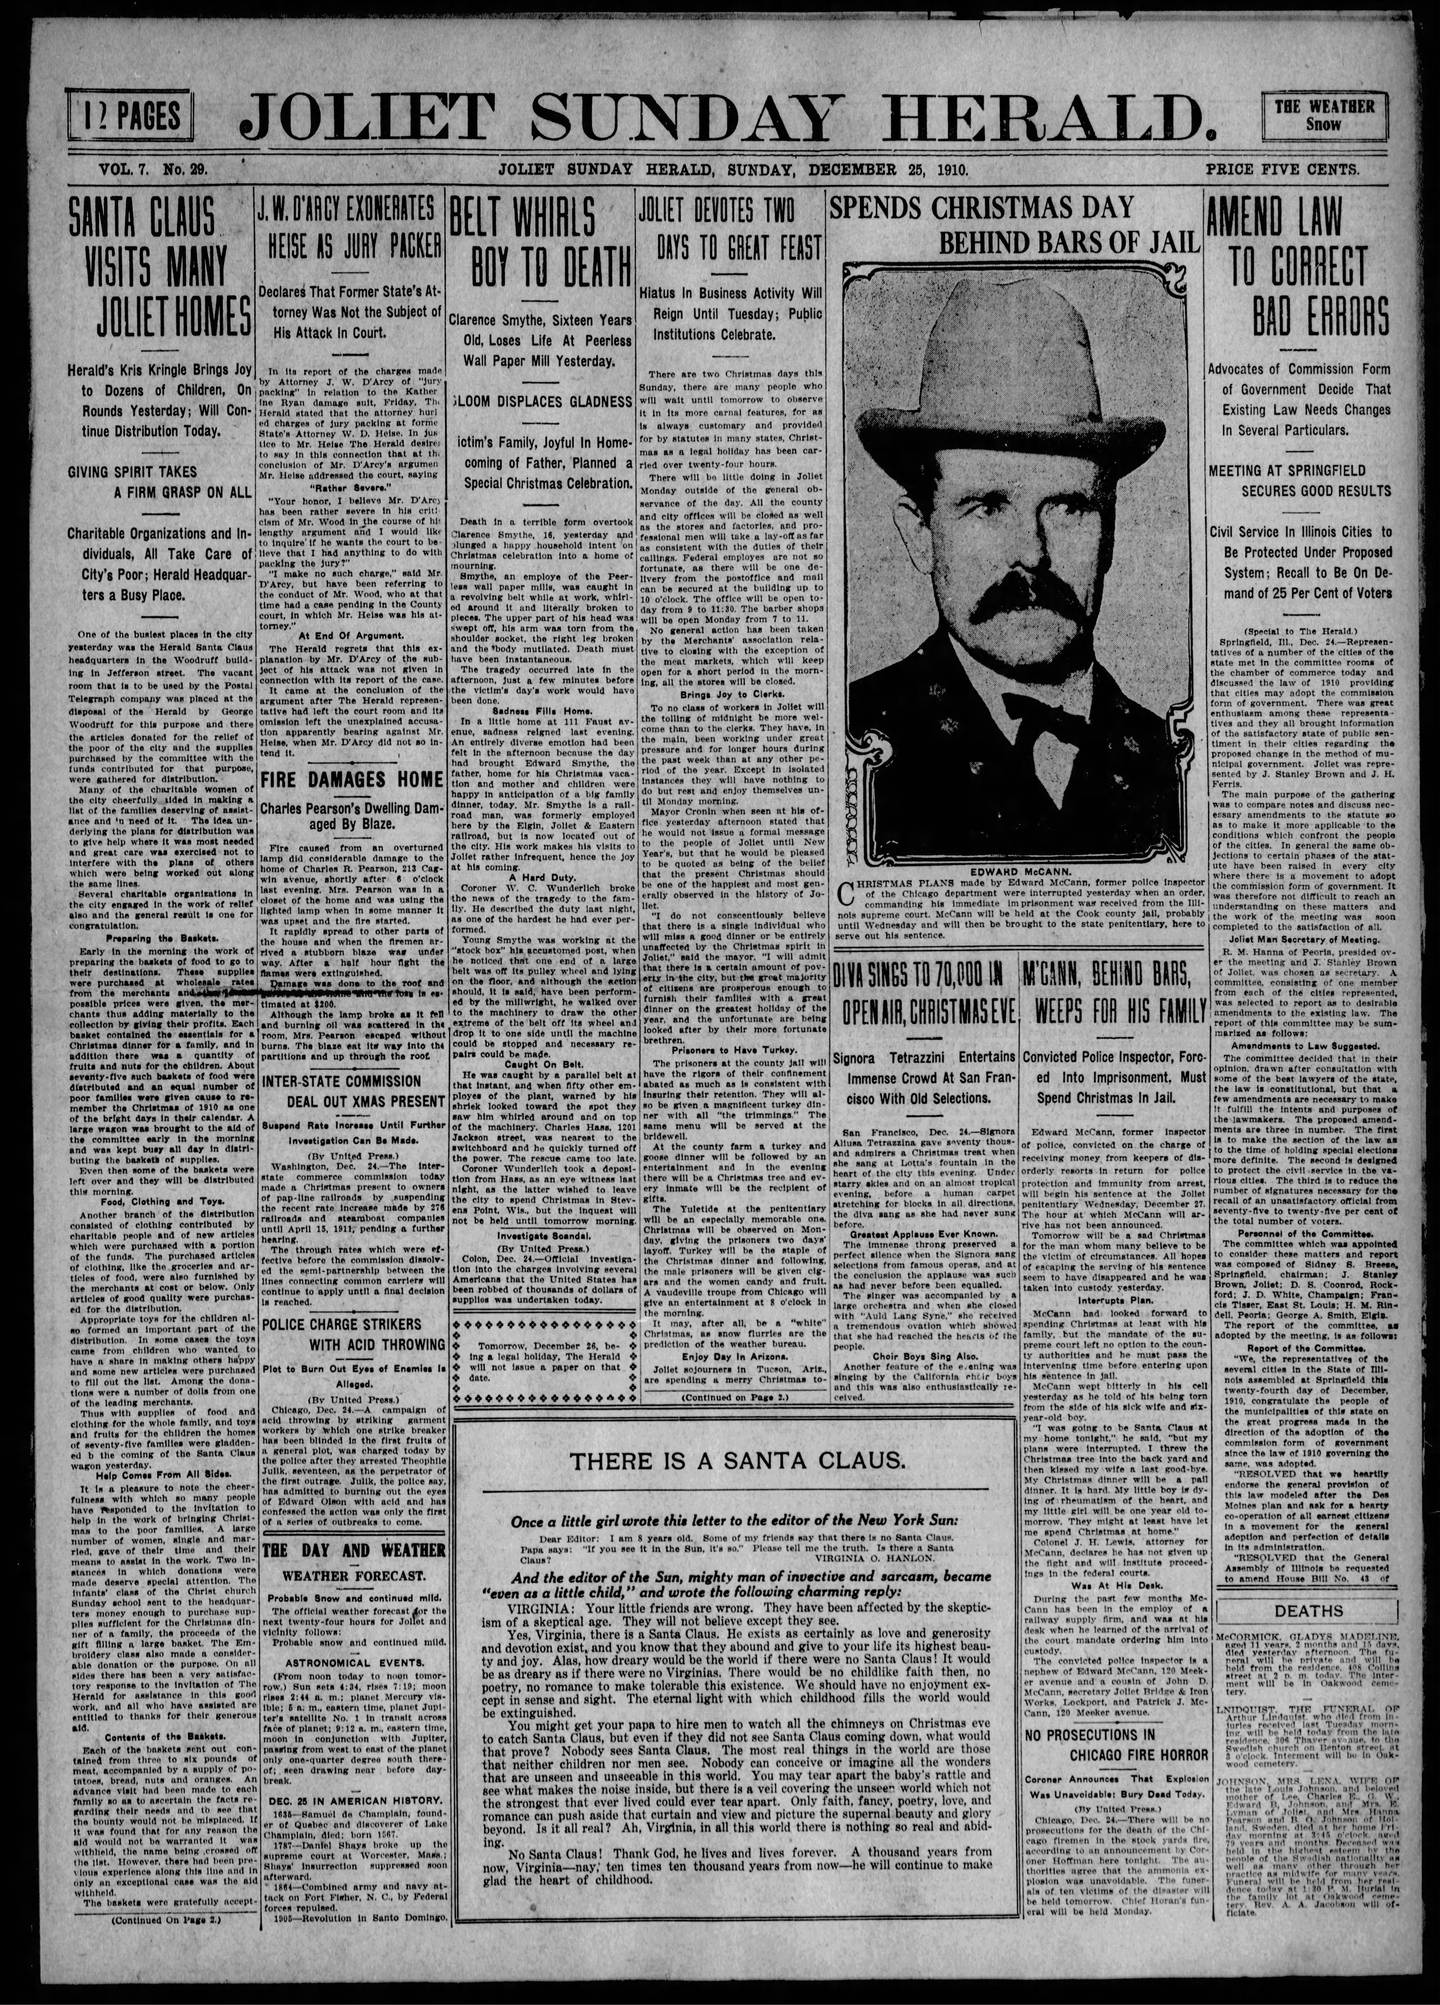 The Herald News Joliet. Front page Sunday, December 25, 1910